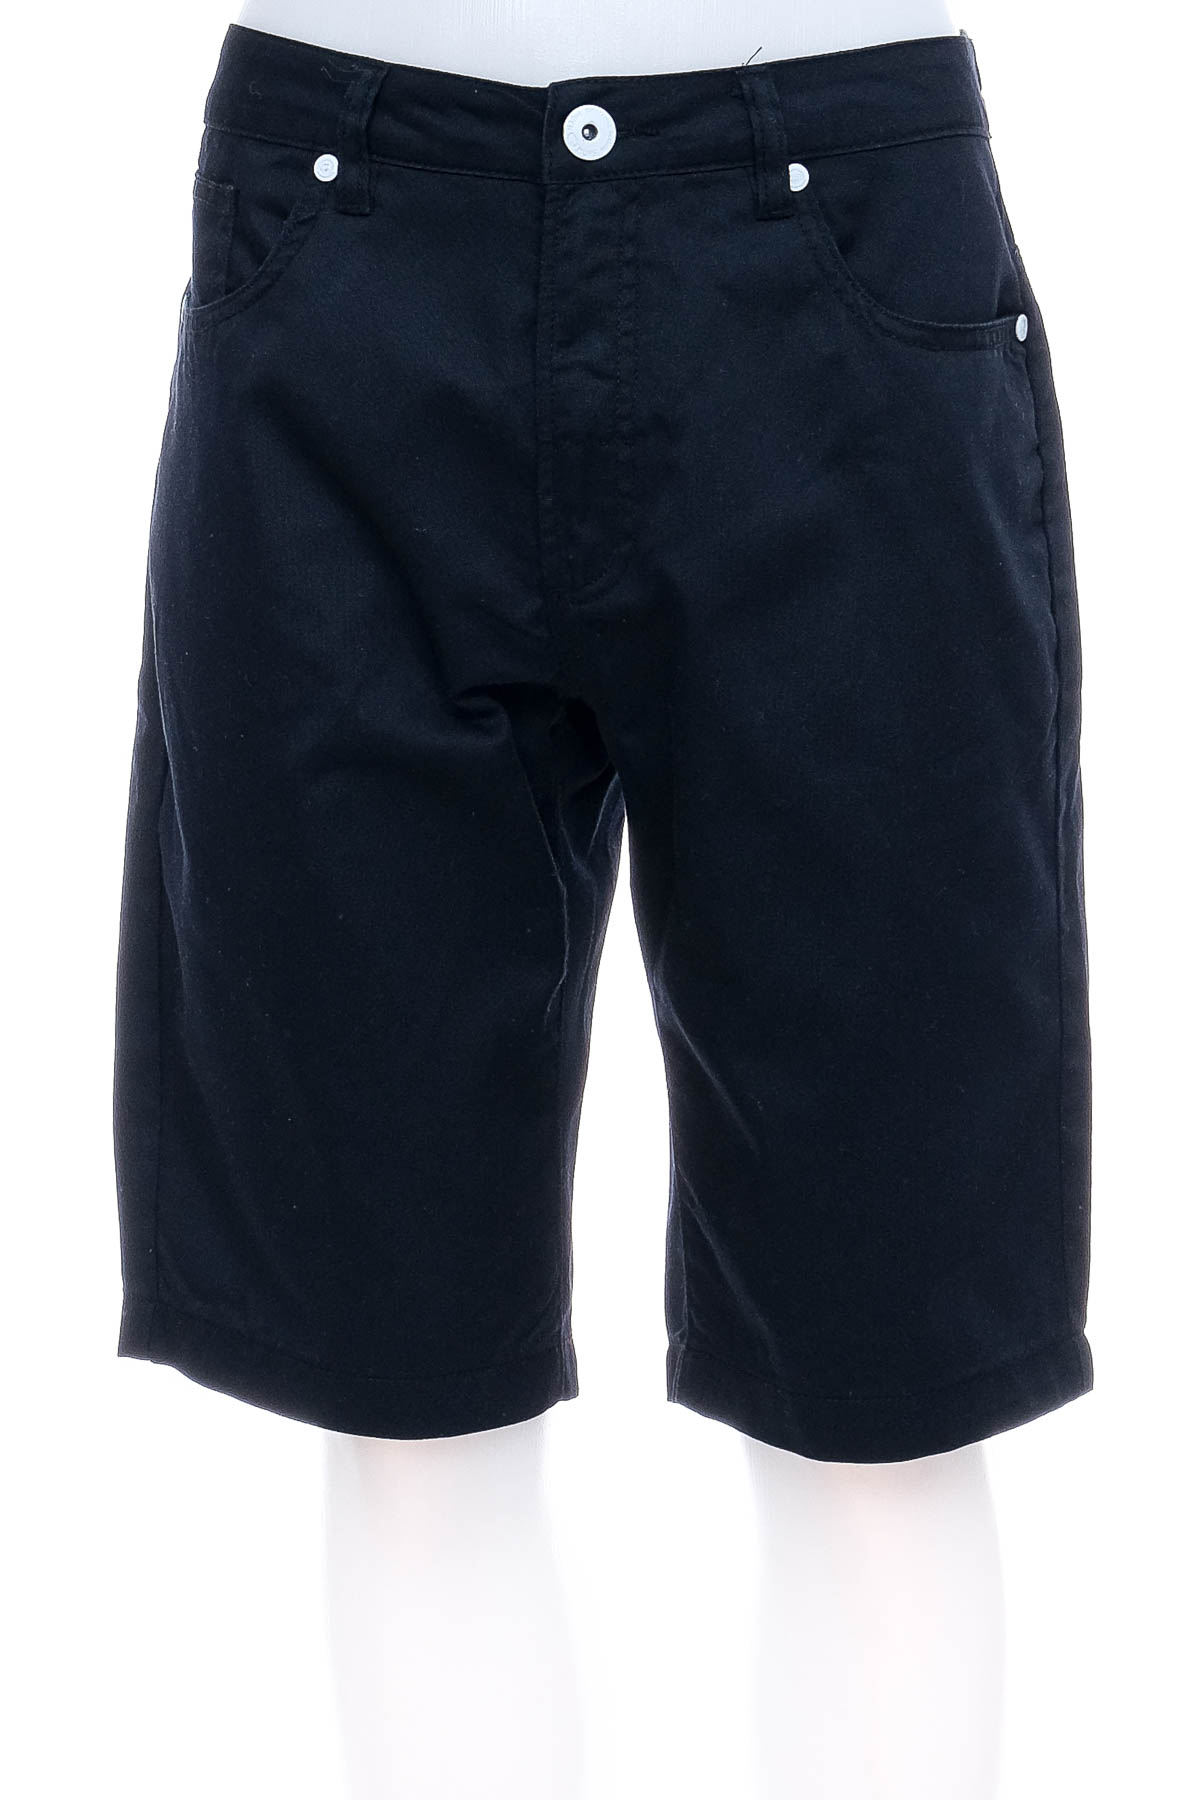 Men's shorts - Much More - 0